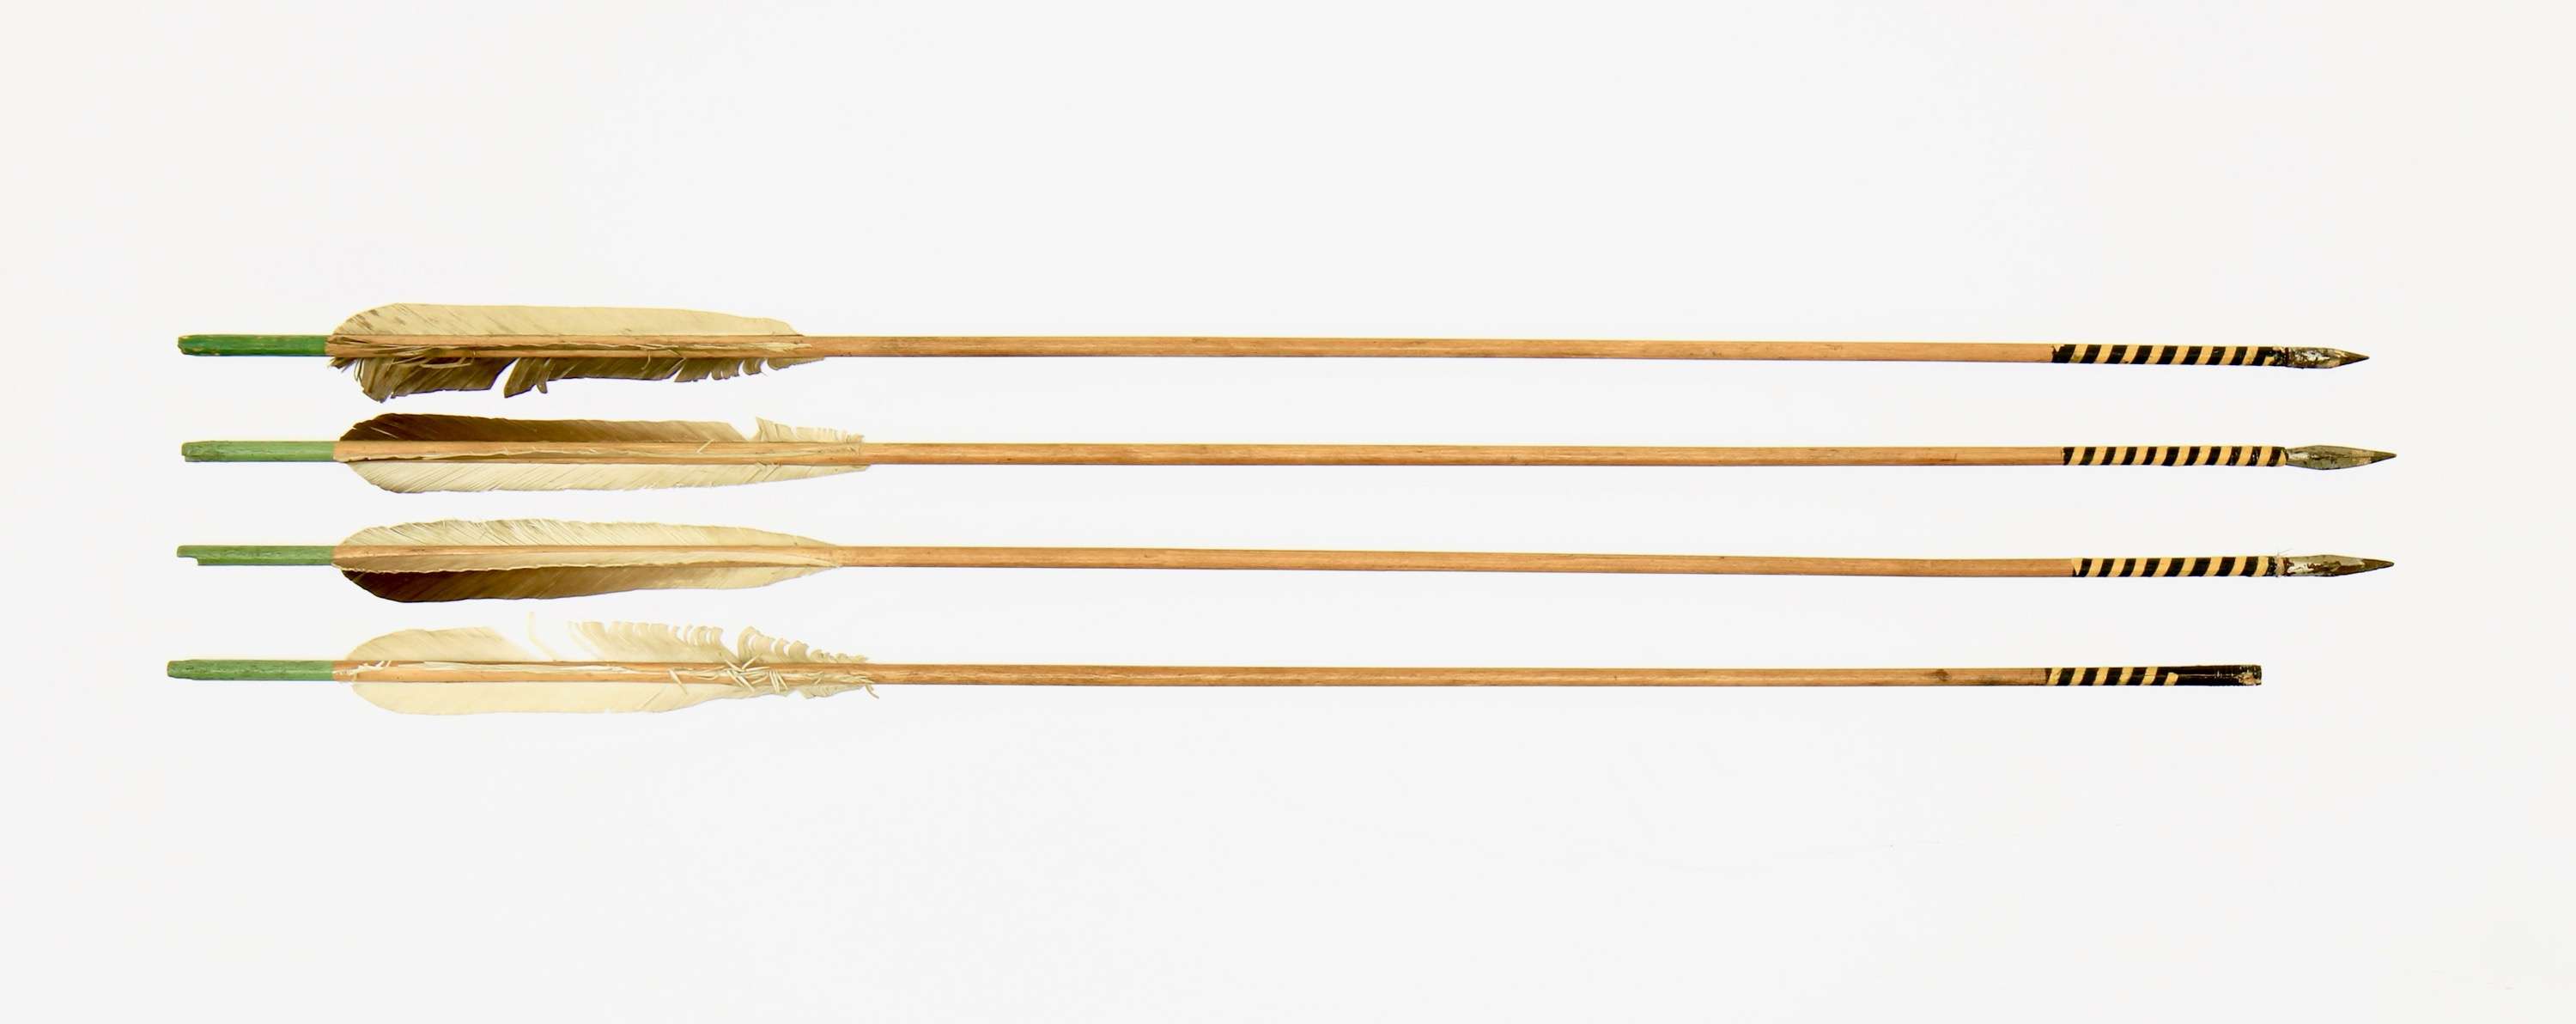 Chinese arrows, 20th century